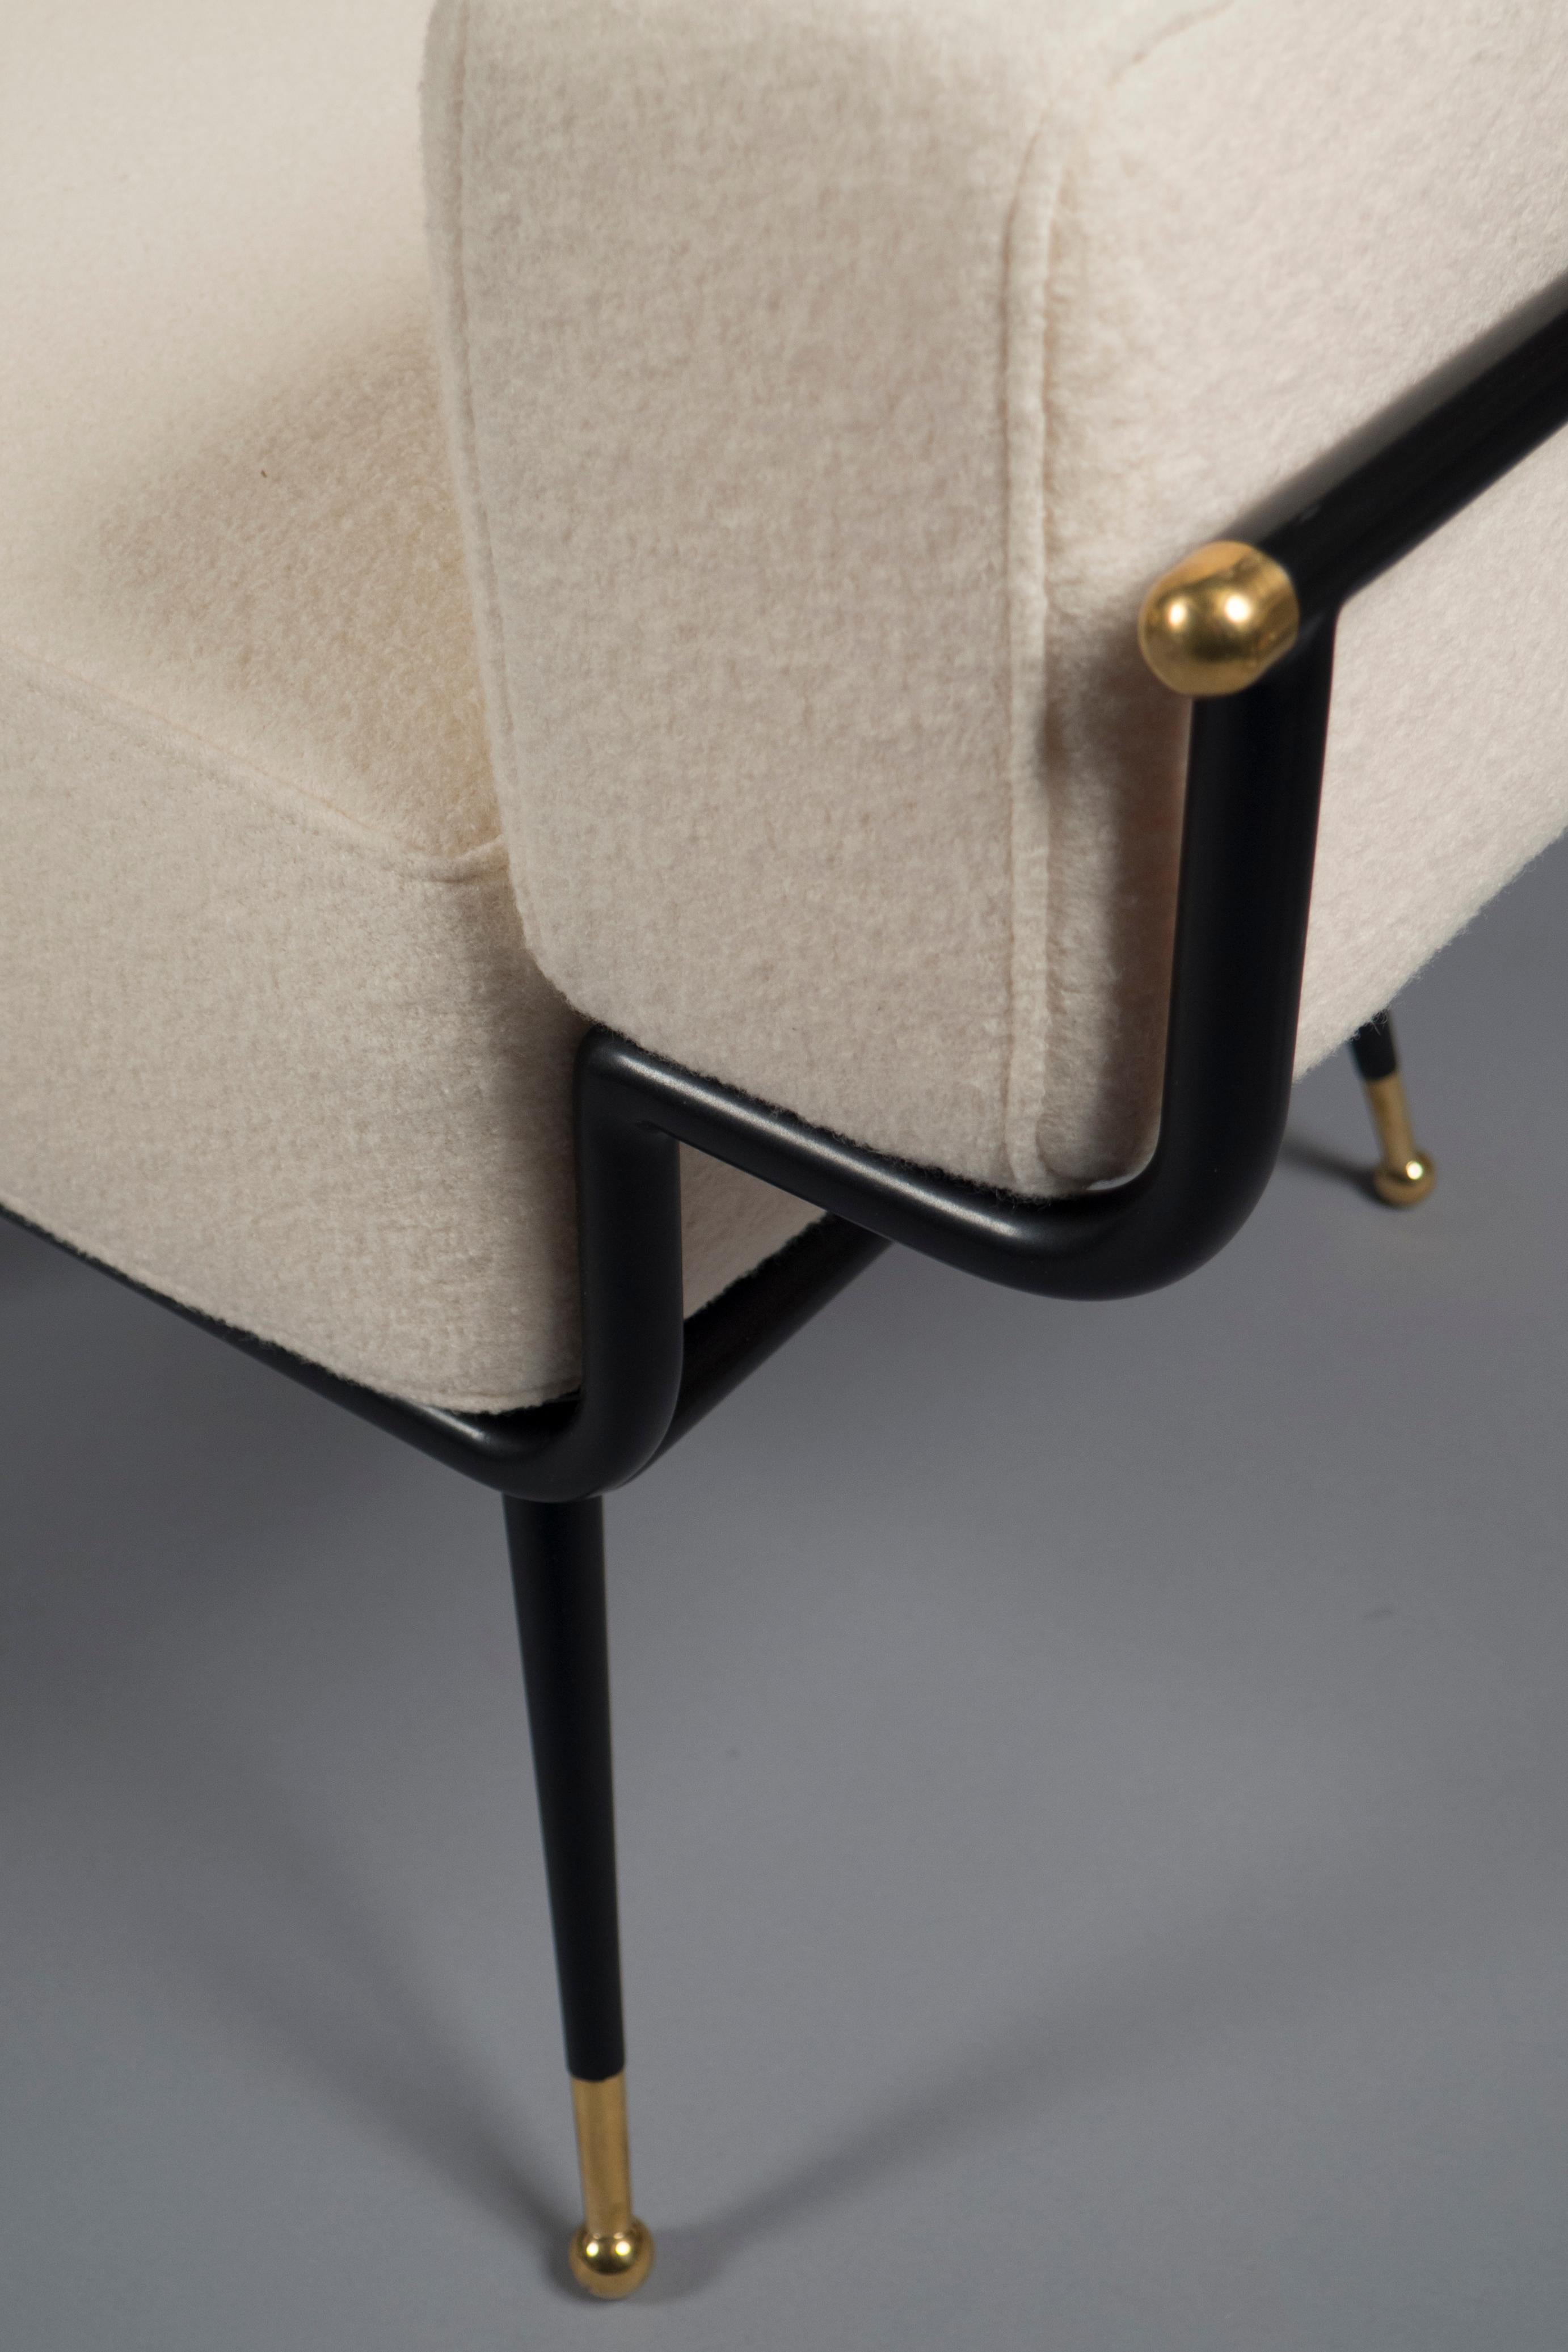 Black metal frames with polished brass details holding a formed foam seat, back and armrests. Splayed legs ending in round brass sabots complete the look.

Measures: Height 30.5”, width 33.5”, depth 30” 
Arm height 23.5”, seat height 16”. 
     